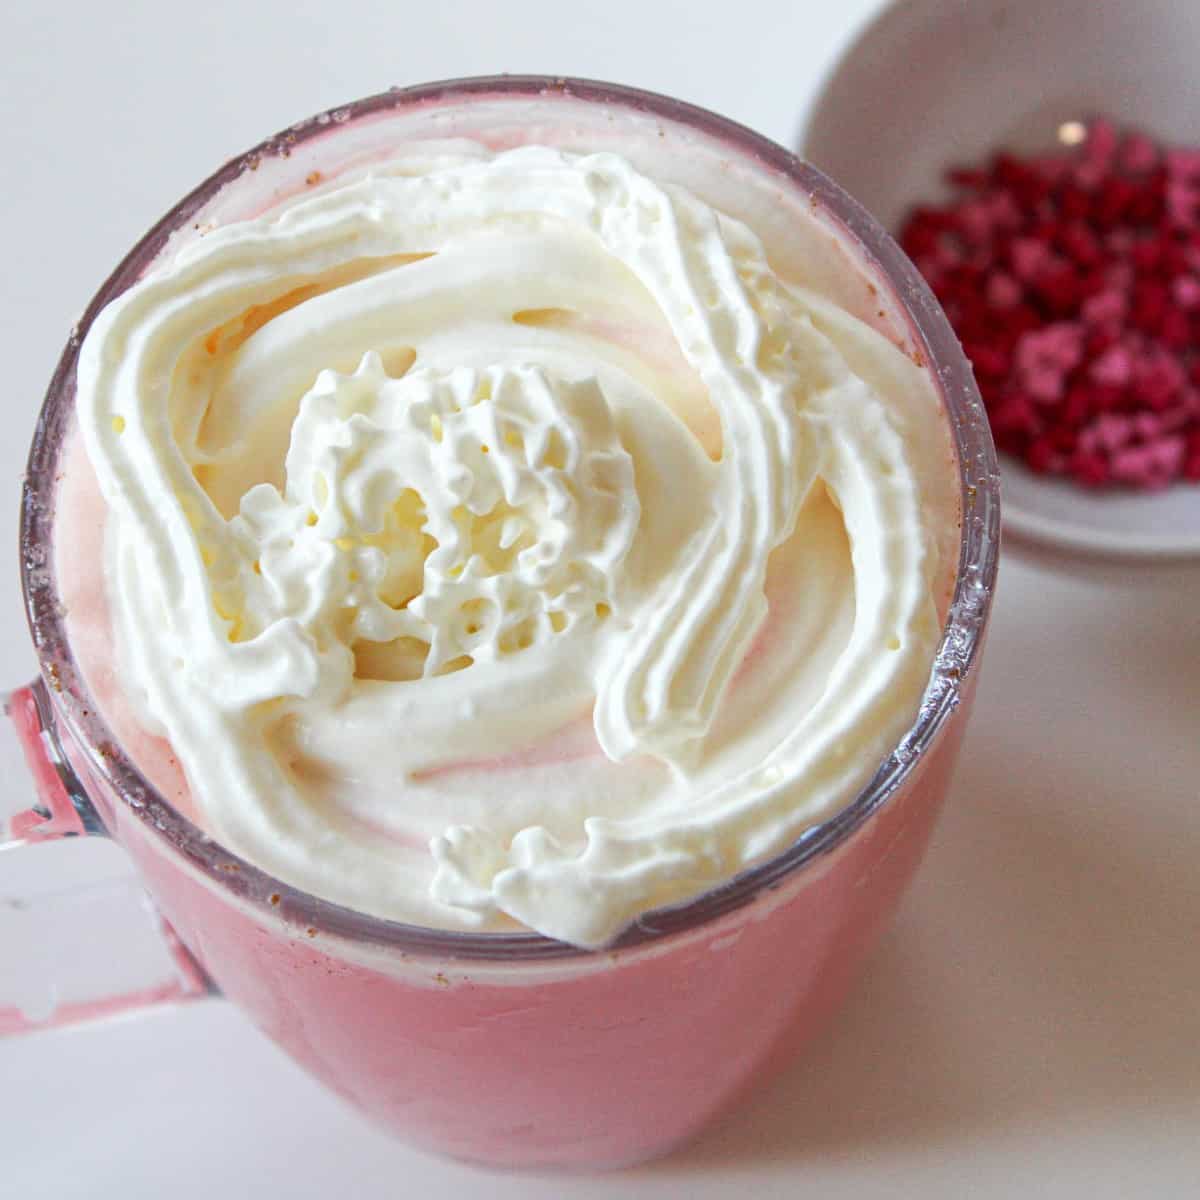 Top your hot chocolate with whipped cream